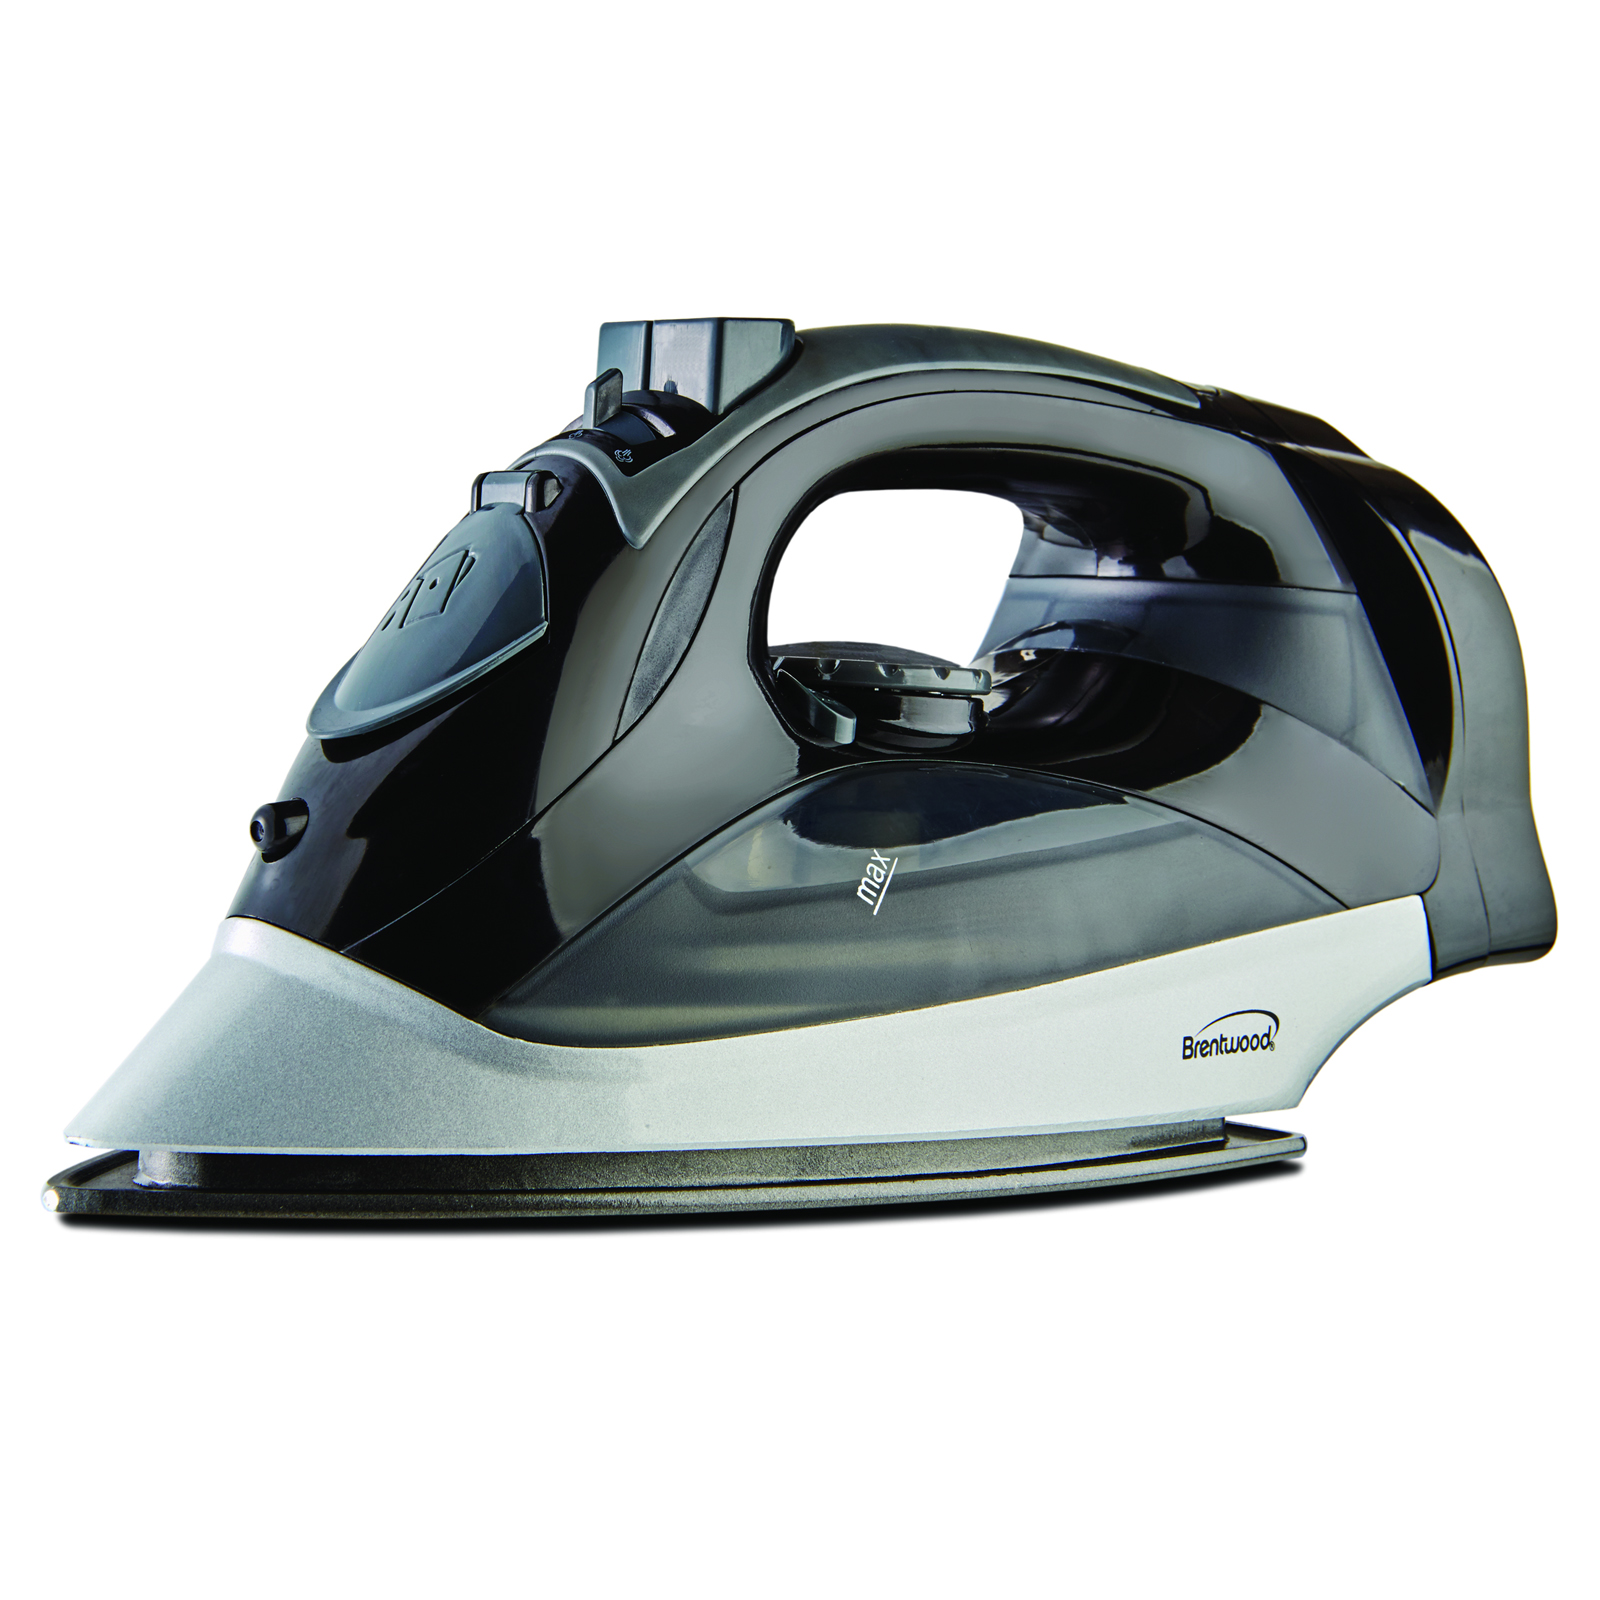 Brentwood 97094456M Steam Iron With Retractable Cord - Black